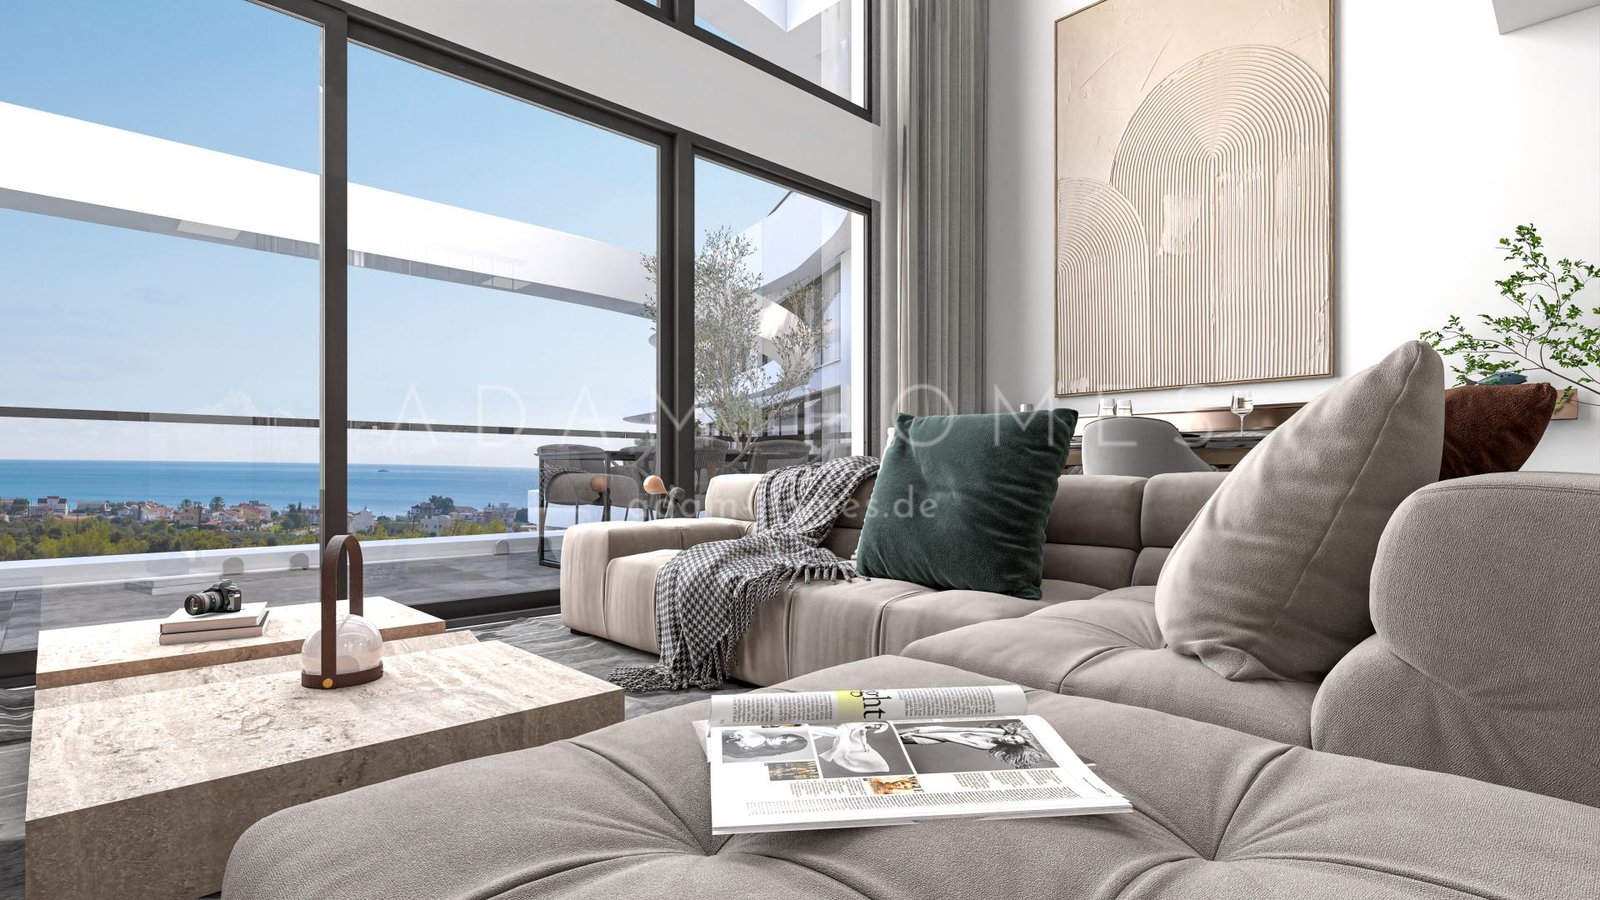 Apartments 2+1 with panoramic views of the Mediterranean Sea